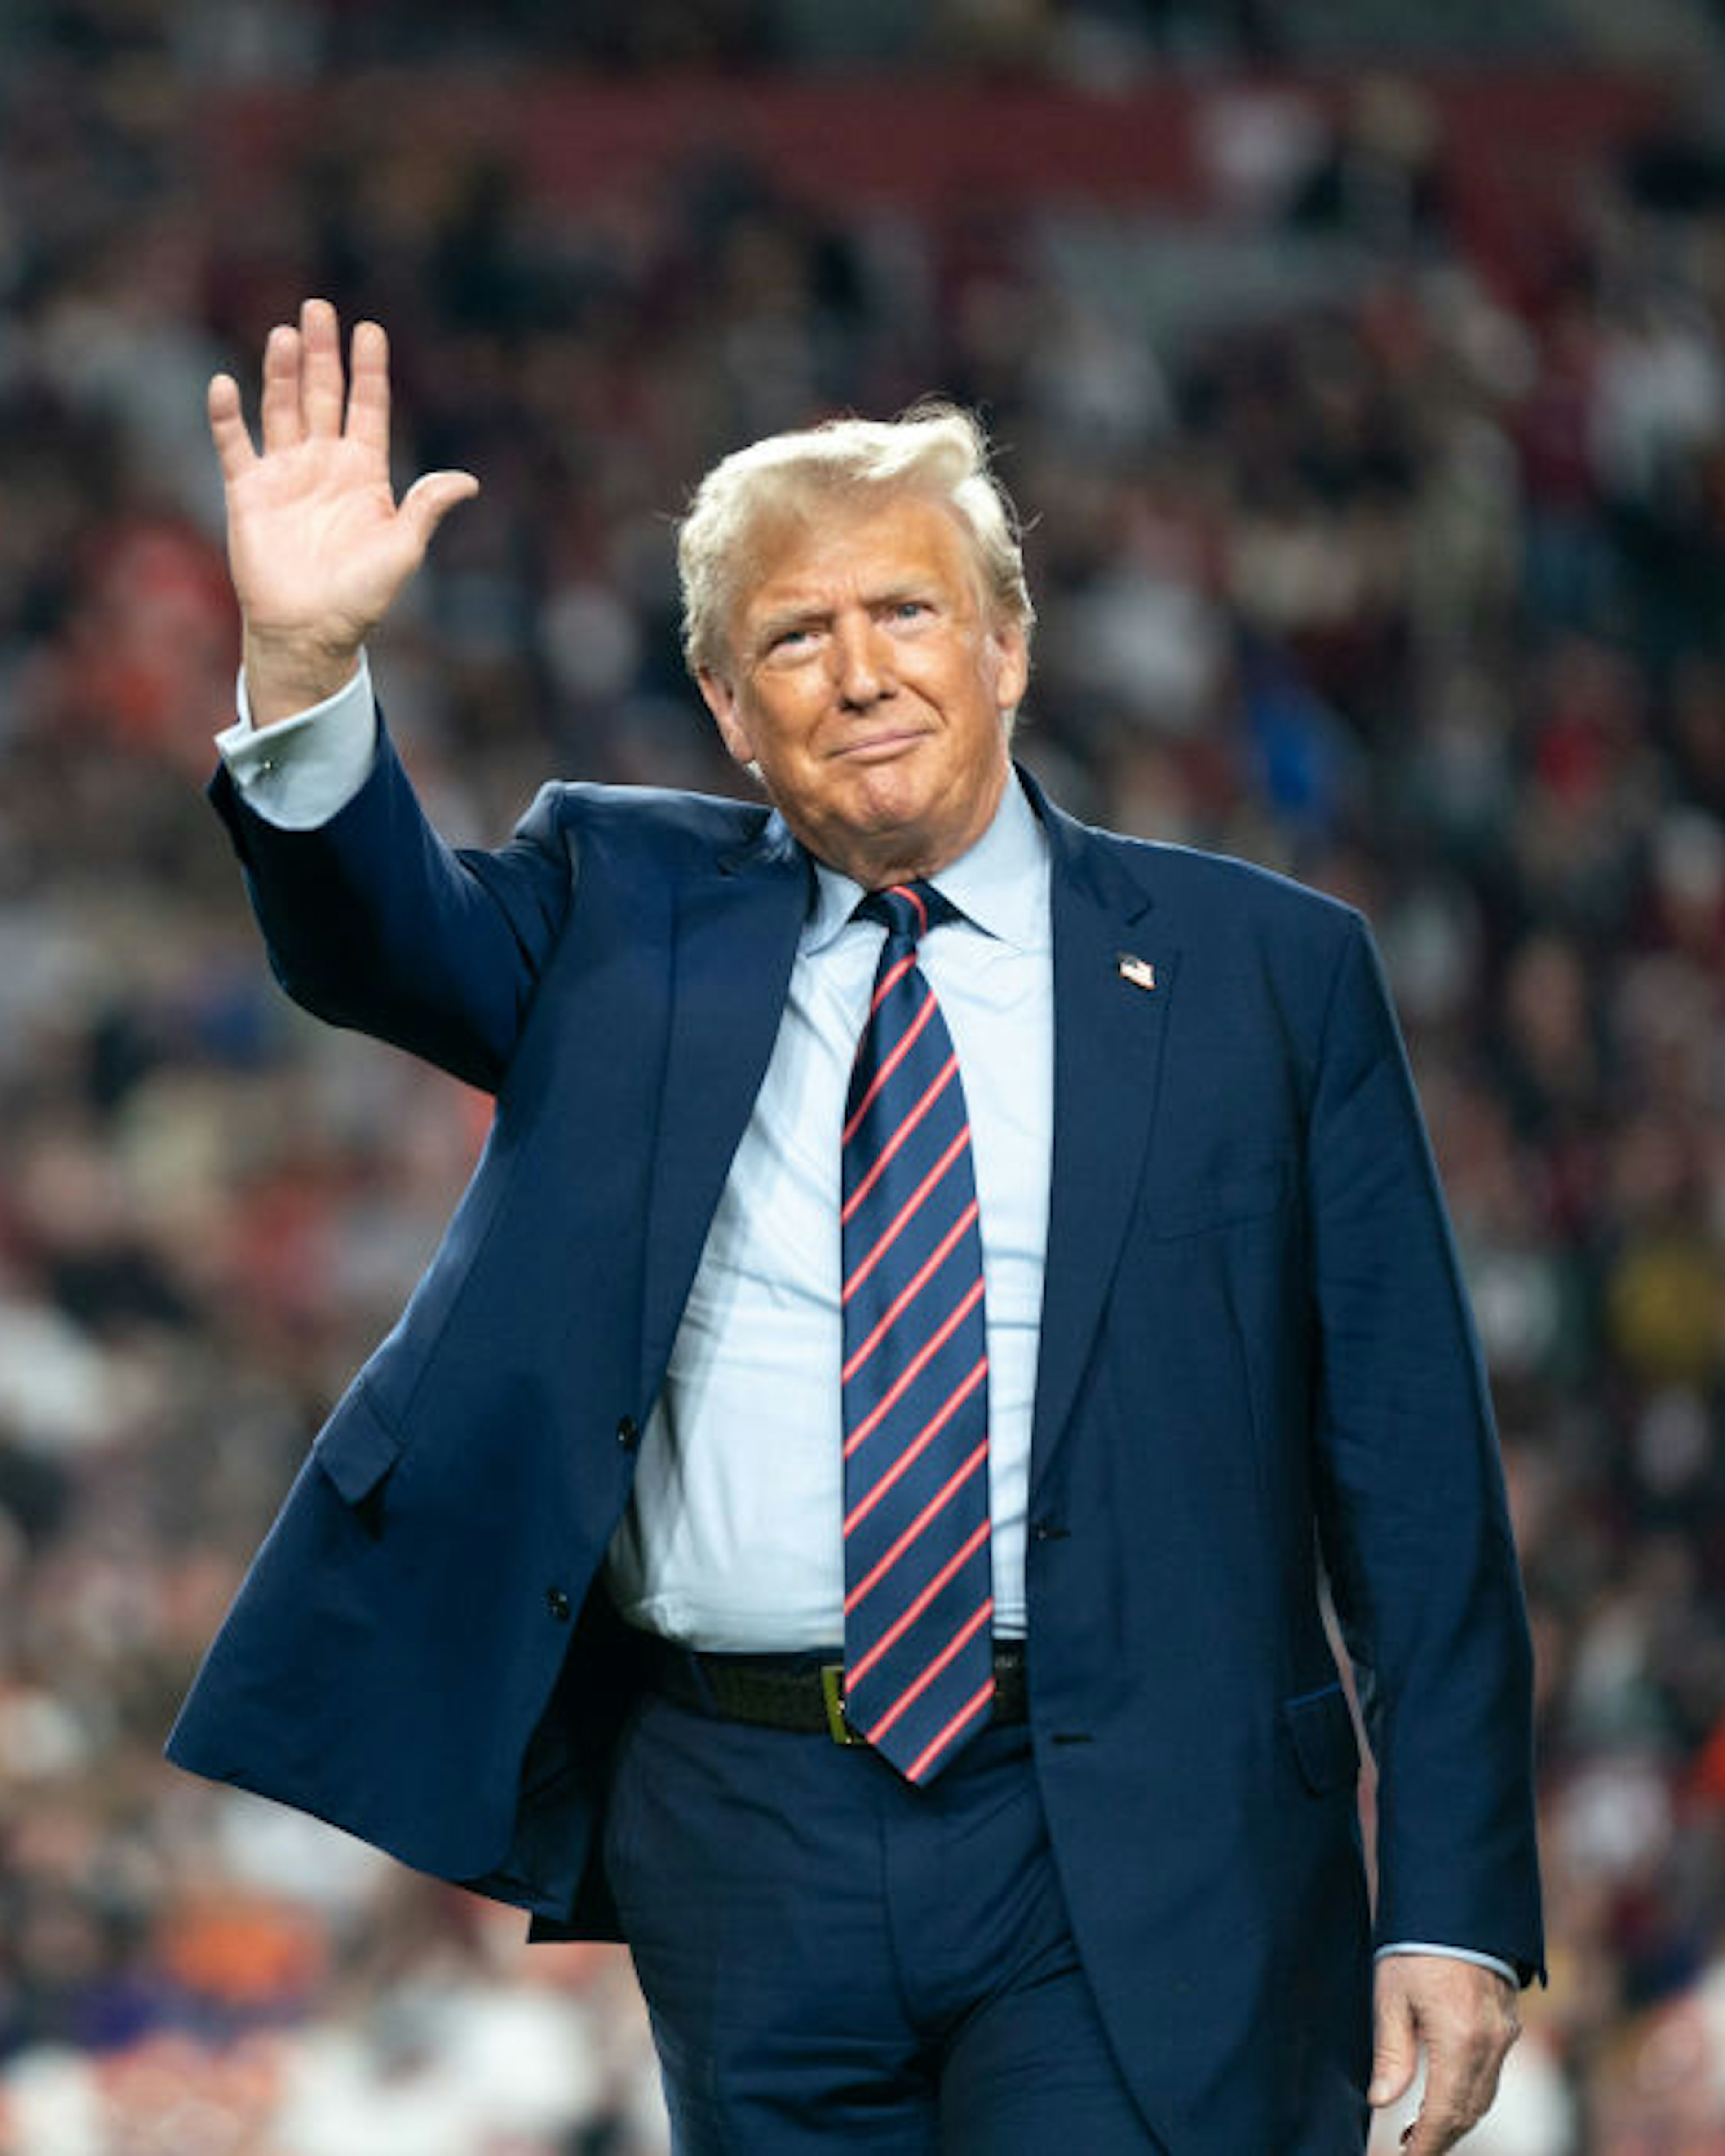 COLUMBIA, SOUTH CAROLINA - NOVEMBER 25: Former U.S. President Donald Trump waves to the crowd on the field during halftime in the Palmetto Bowl between Clemson and South Carolina at Williams Brice Stadium on November 25, 2023 in Columbia, South Carolina. Trump attended the rivalry game in a key early-voting state as he campaigns ahead of next year’s Republican presidential primary. (Photo by Sean Rayford/Getty Images)